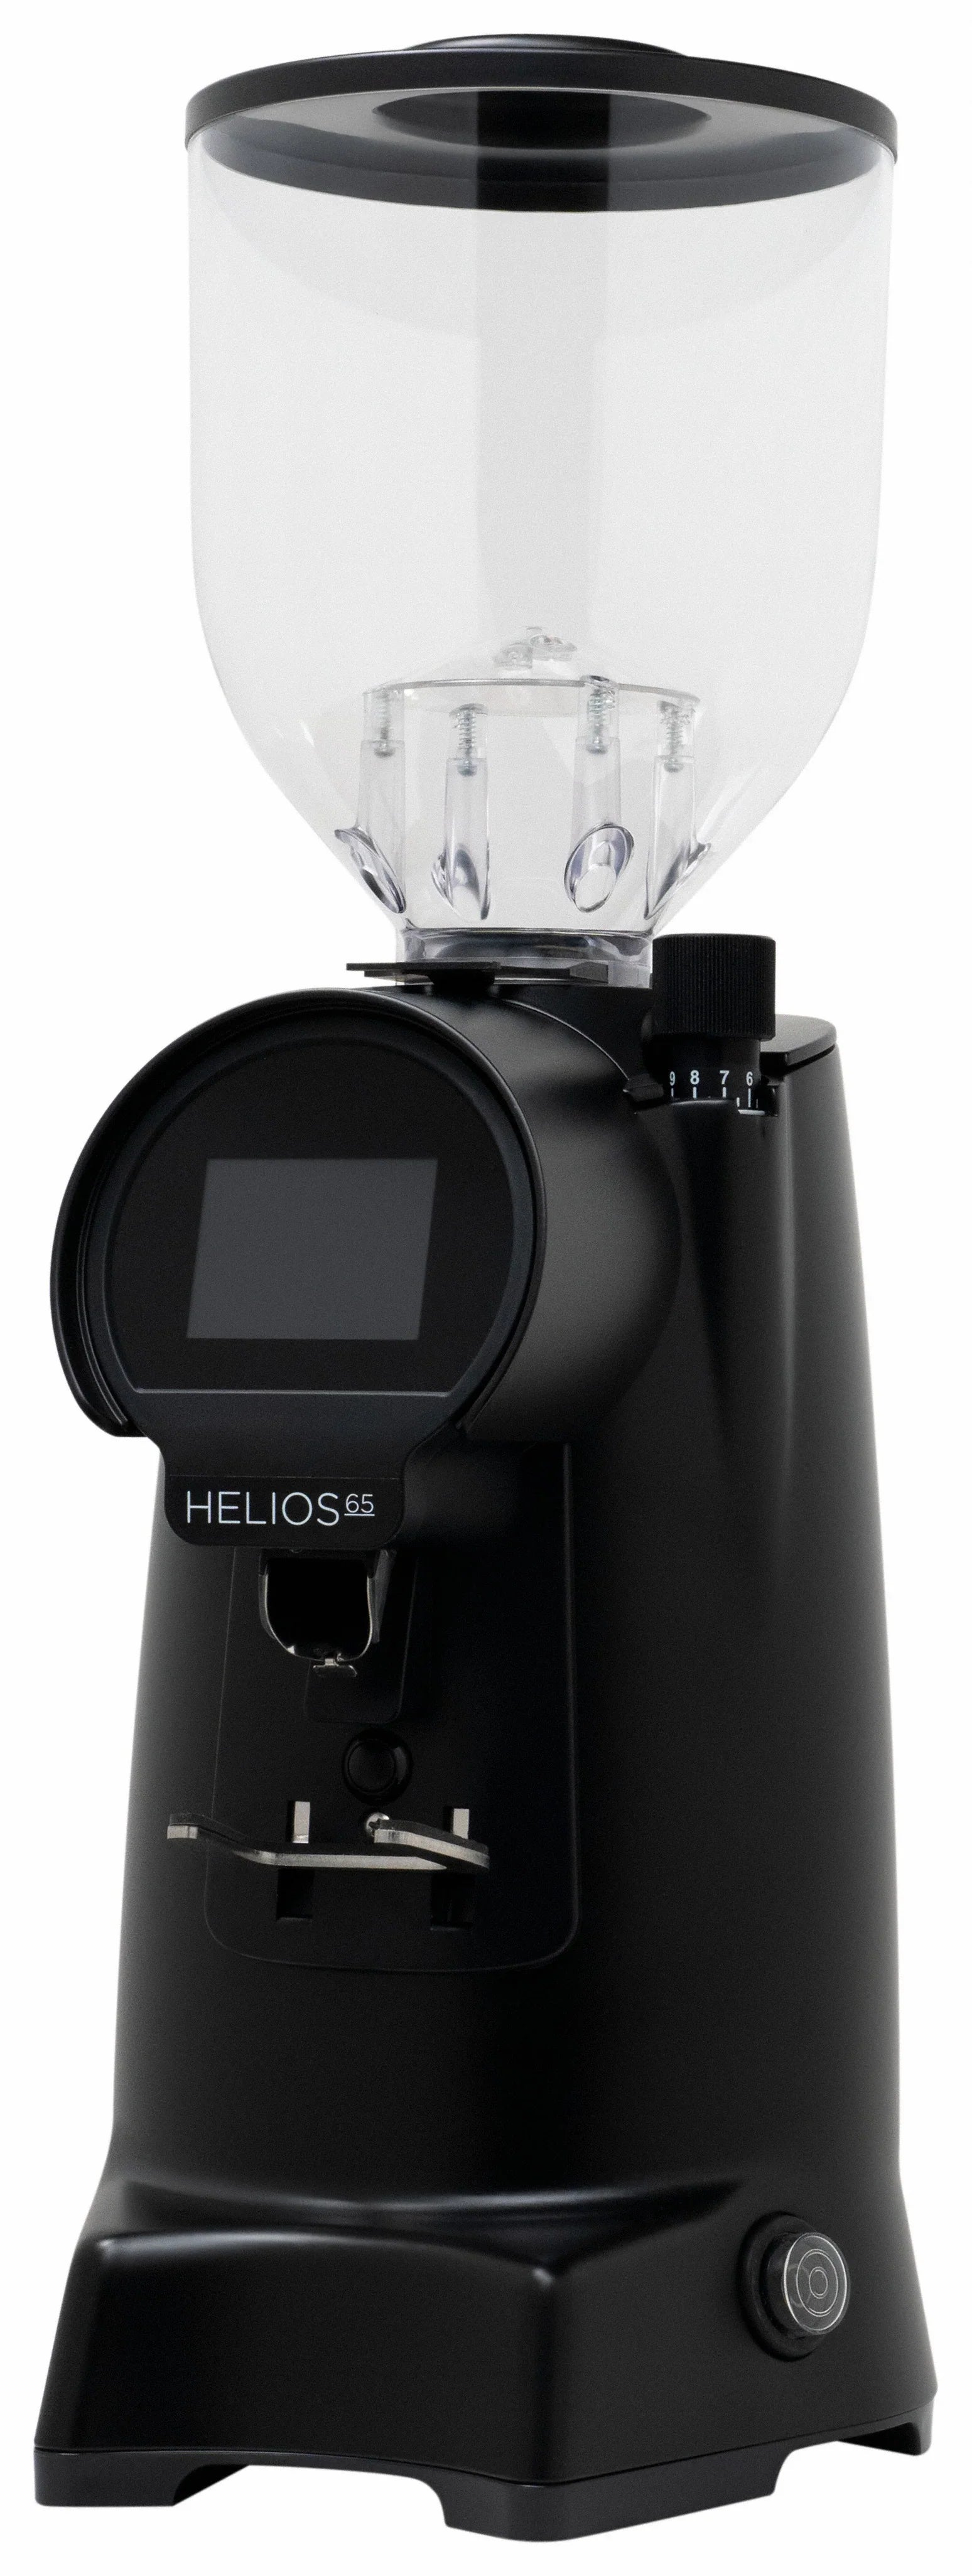 https://cafeliegeois.ca/cdn/shop/products/wmed-Eureka-Helios-Black-QTR_7fa6b820-b11b-4b80-adab-aac49b6e5b98.webp?v=1680891005&width=1548